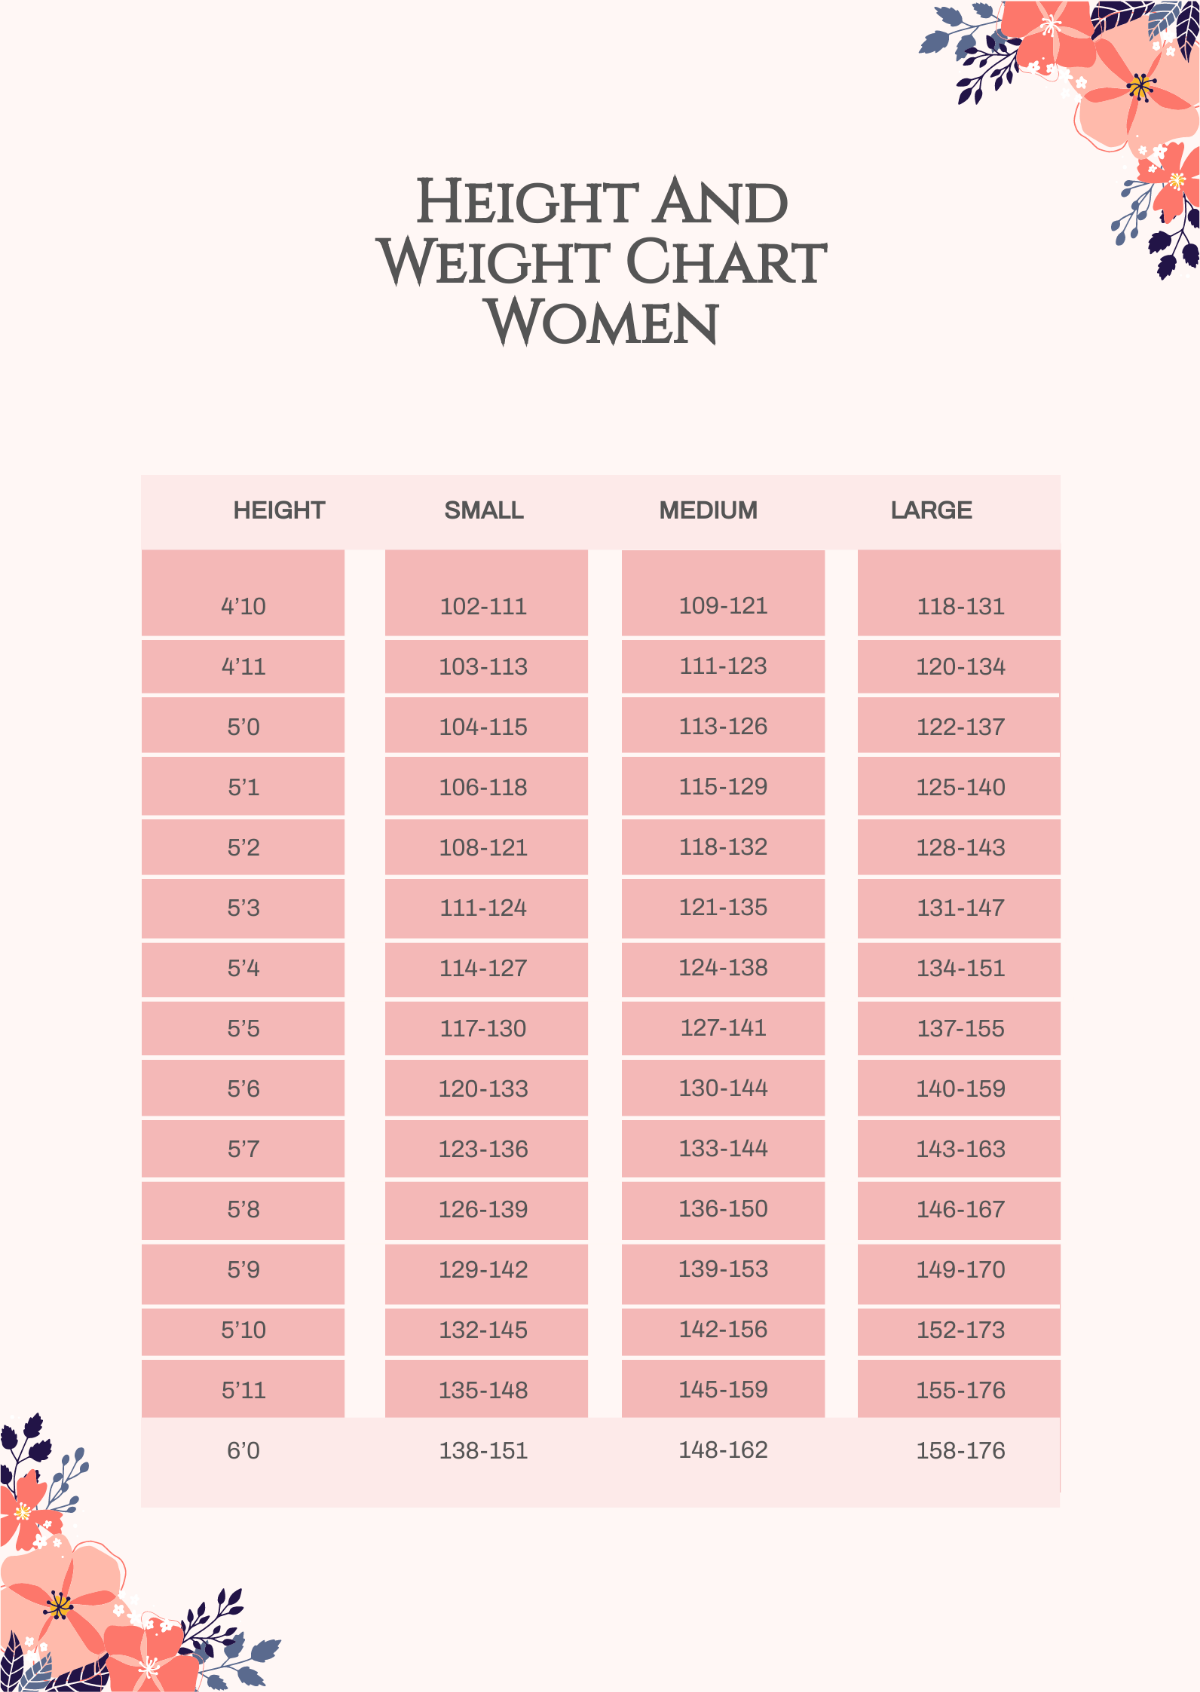 Height and Weight Chart Women Template